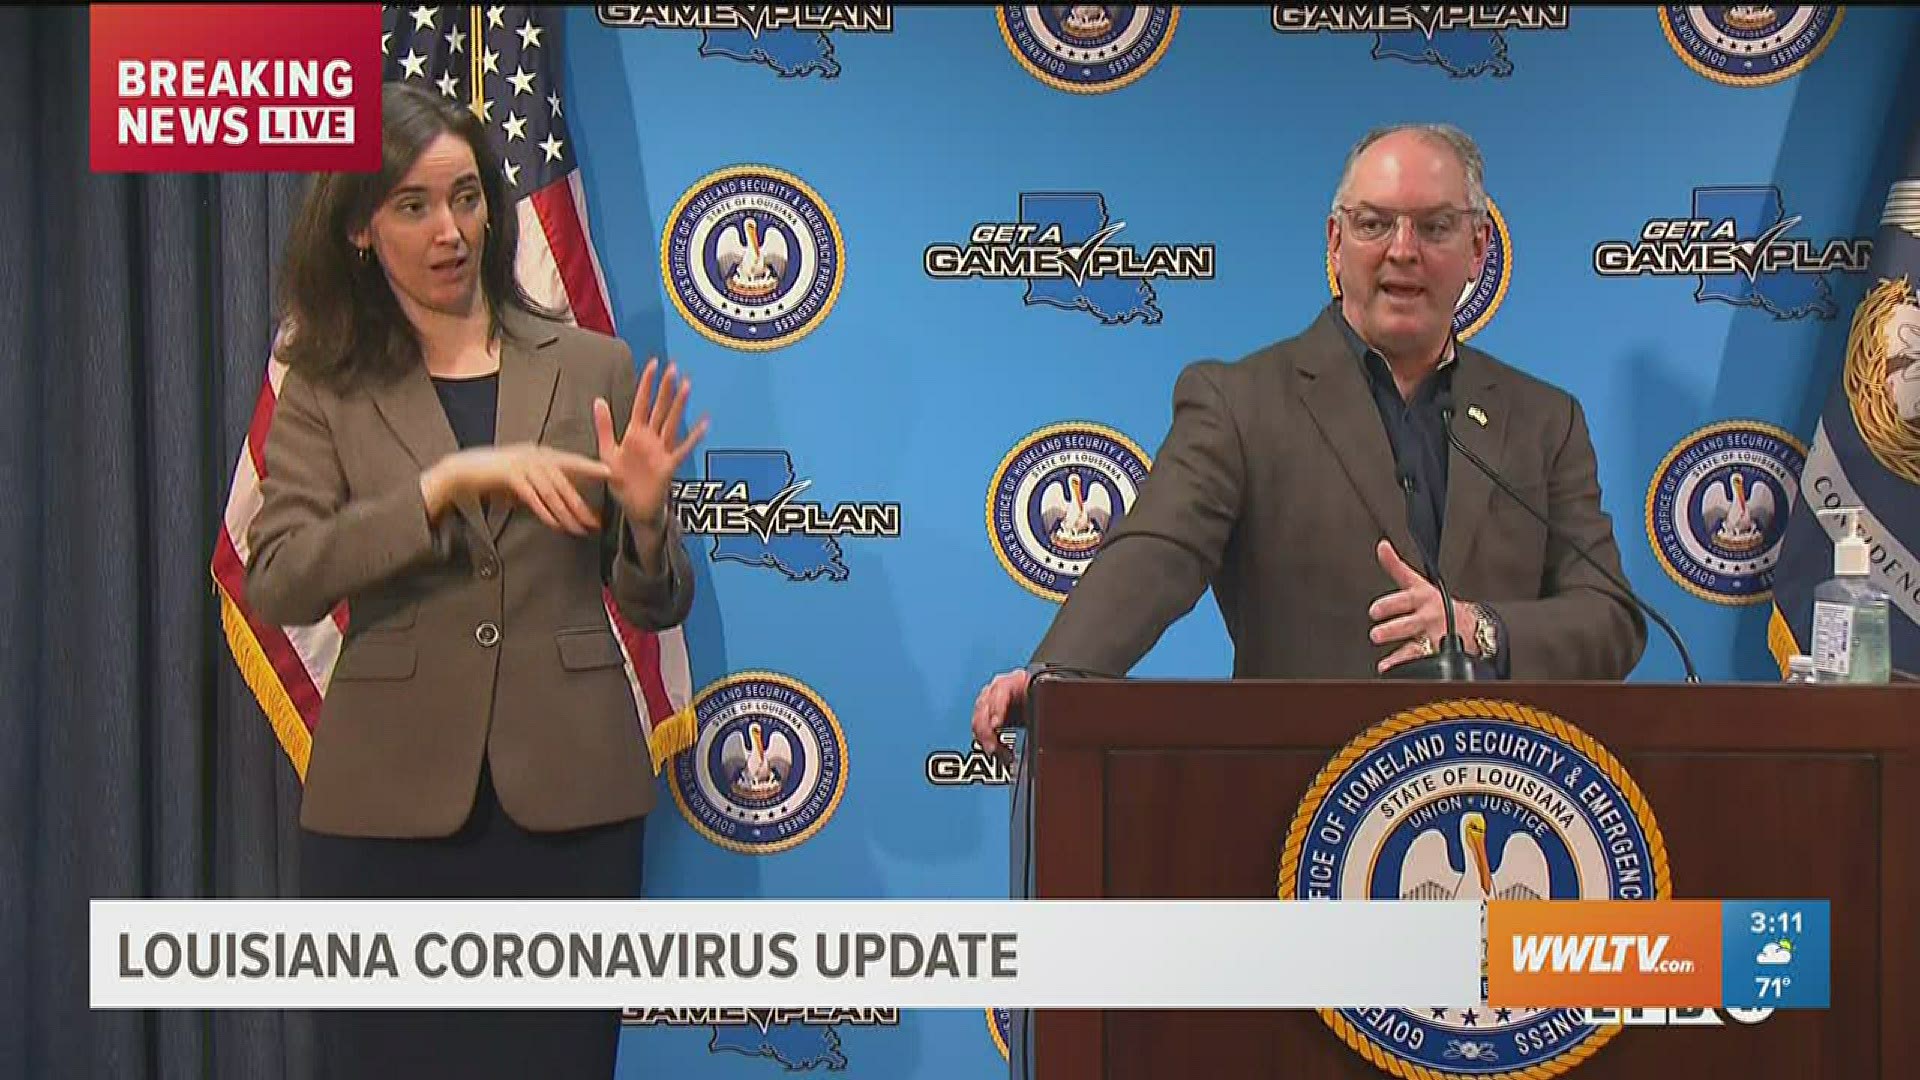 No concrete plans have been made yet, but Gov. Edwards gave insight on what is being discussed.